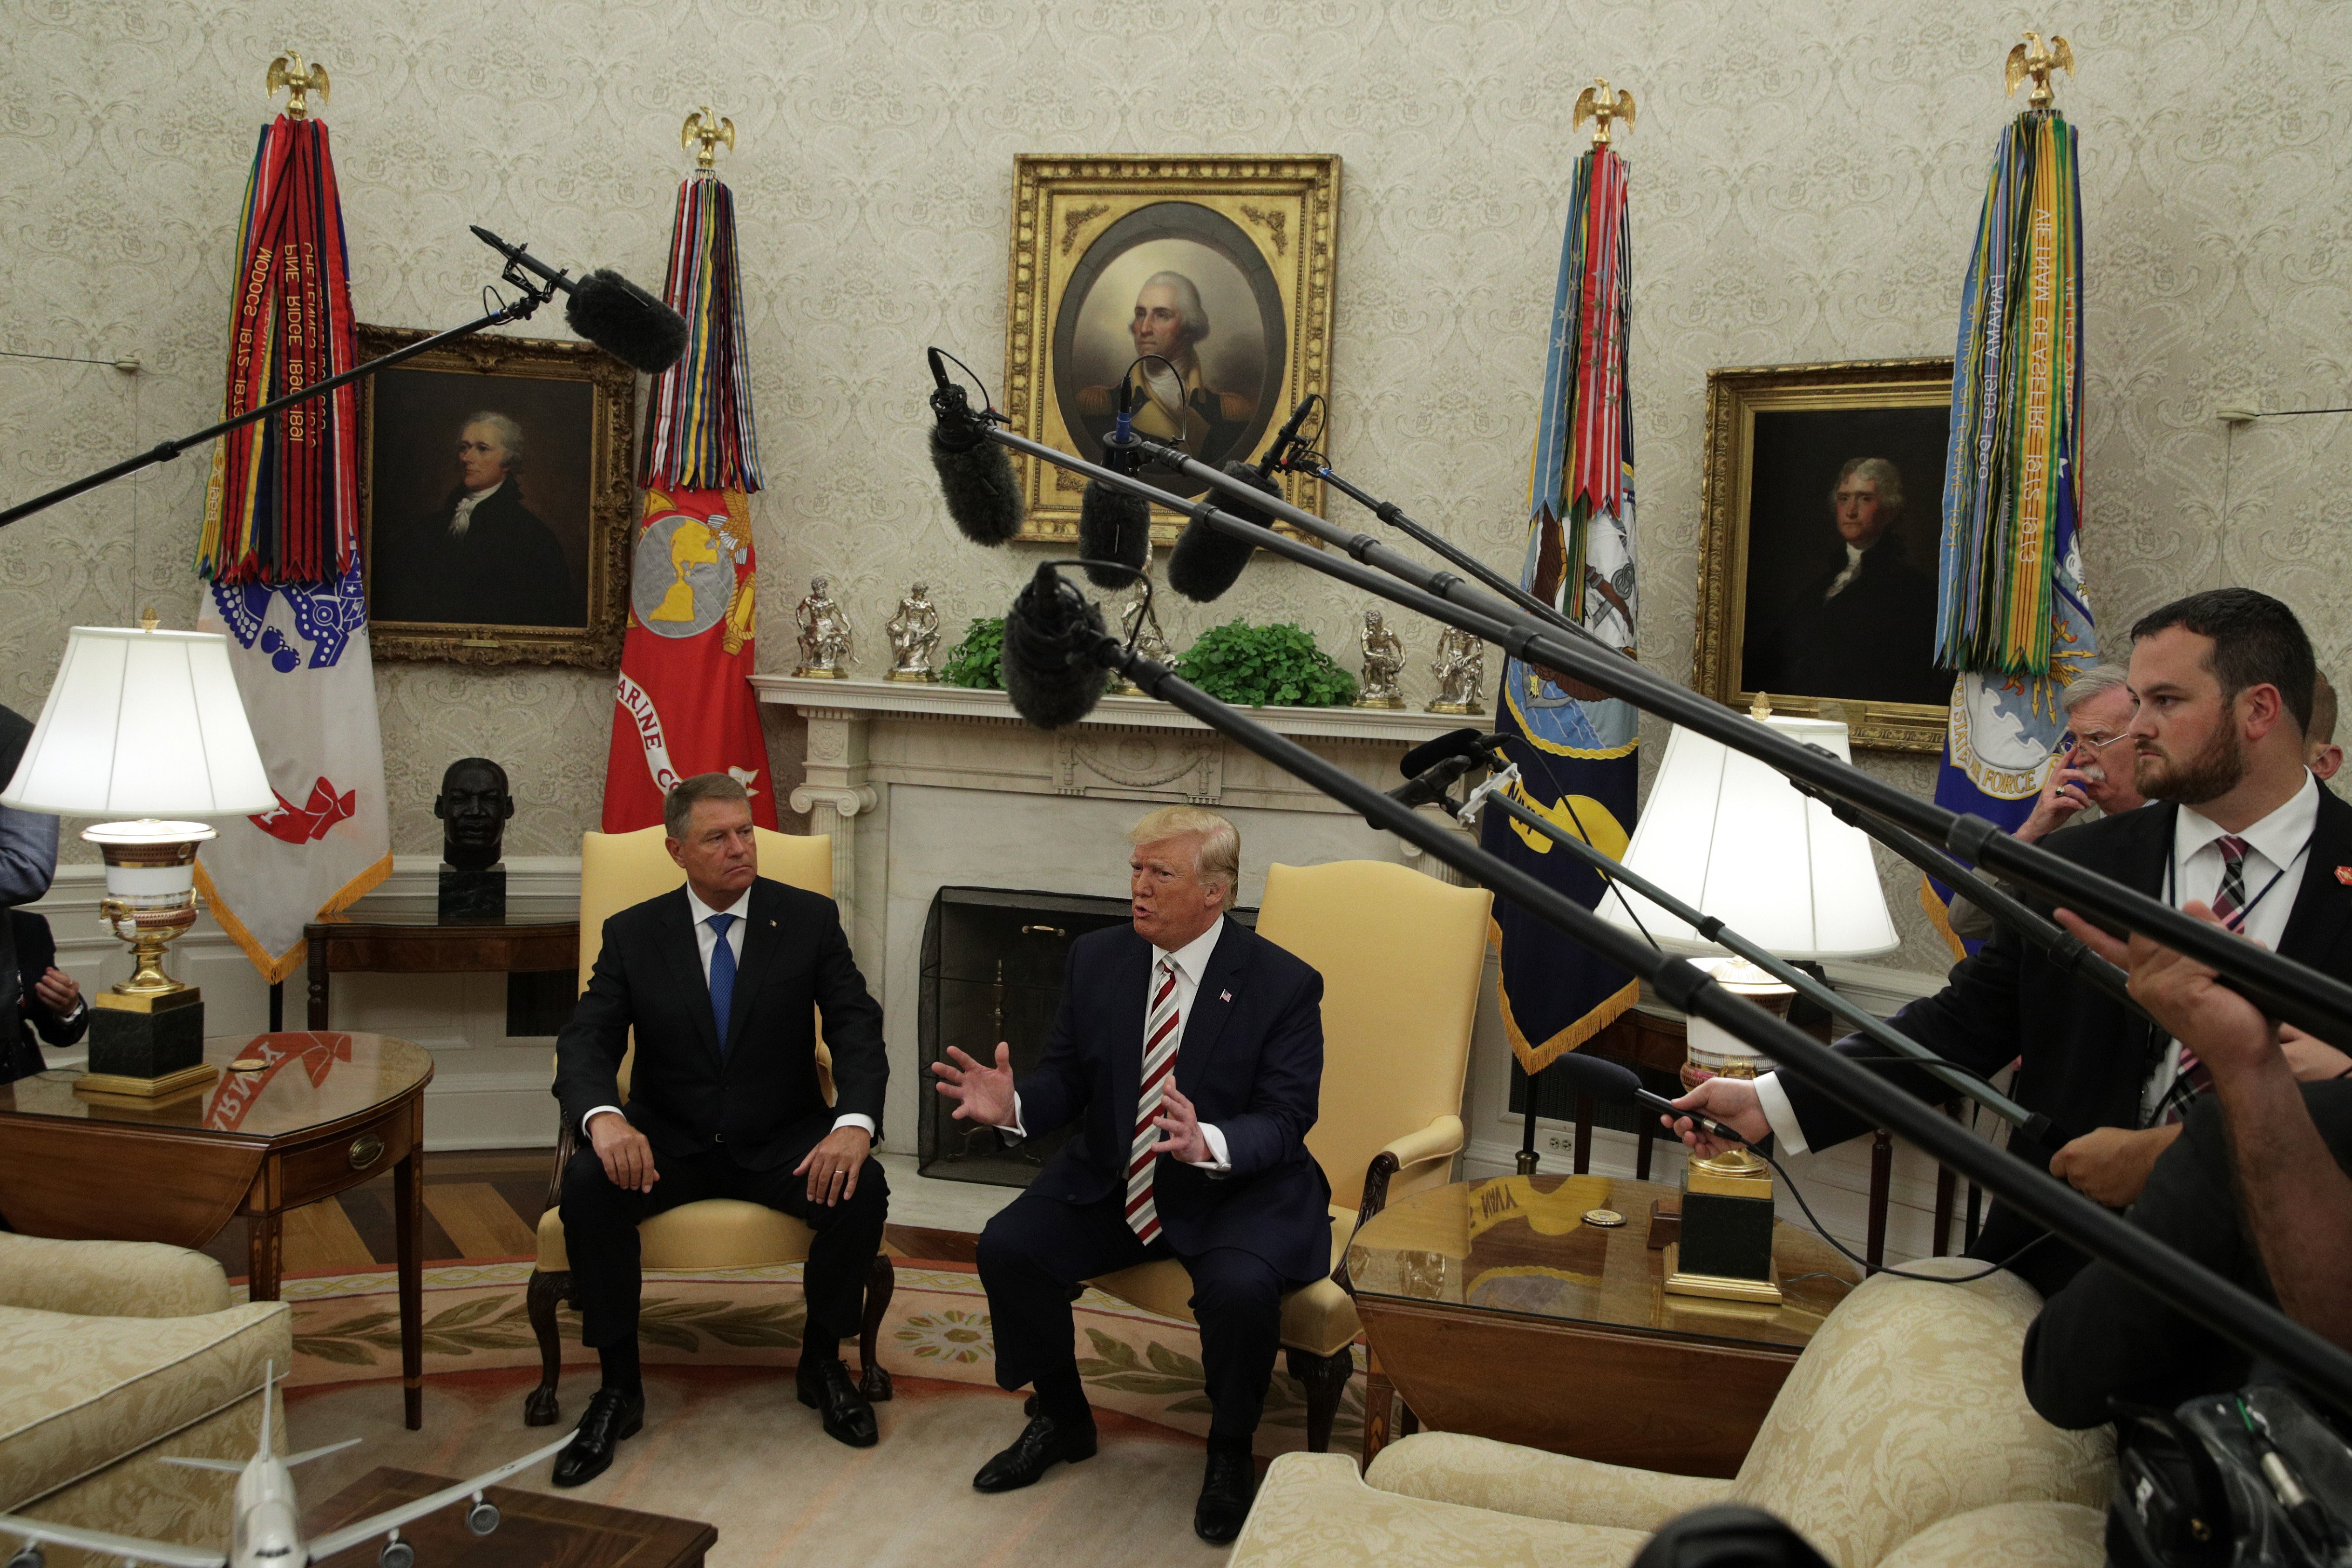 WASHINGTON, DC - AUGUST 20: U.S. President Donald Trump speaks to members of the media as President of Romania Klaus Iohannis listens in the Oval Office of the White House August 20, 2019 in Washington, DC. This is Iohannis’ second visit to the Trump White House and the two leaders are expected to discuss bilateral issues during their meeting. (Photo by Alex Wong/Getty Images)